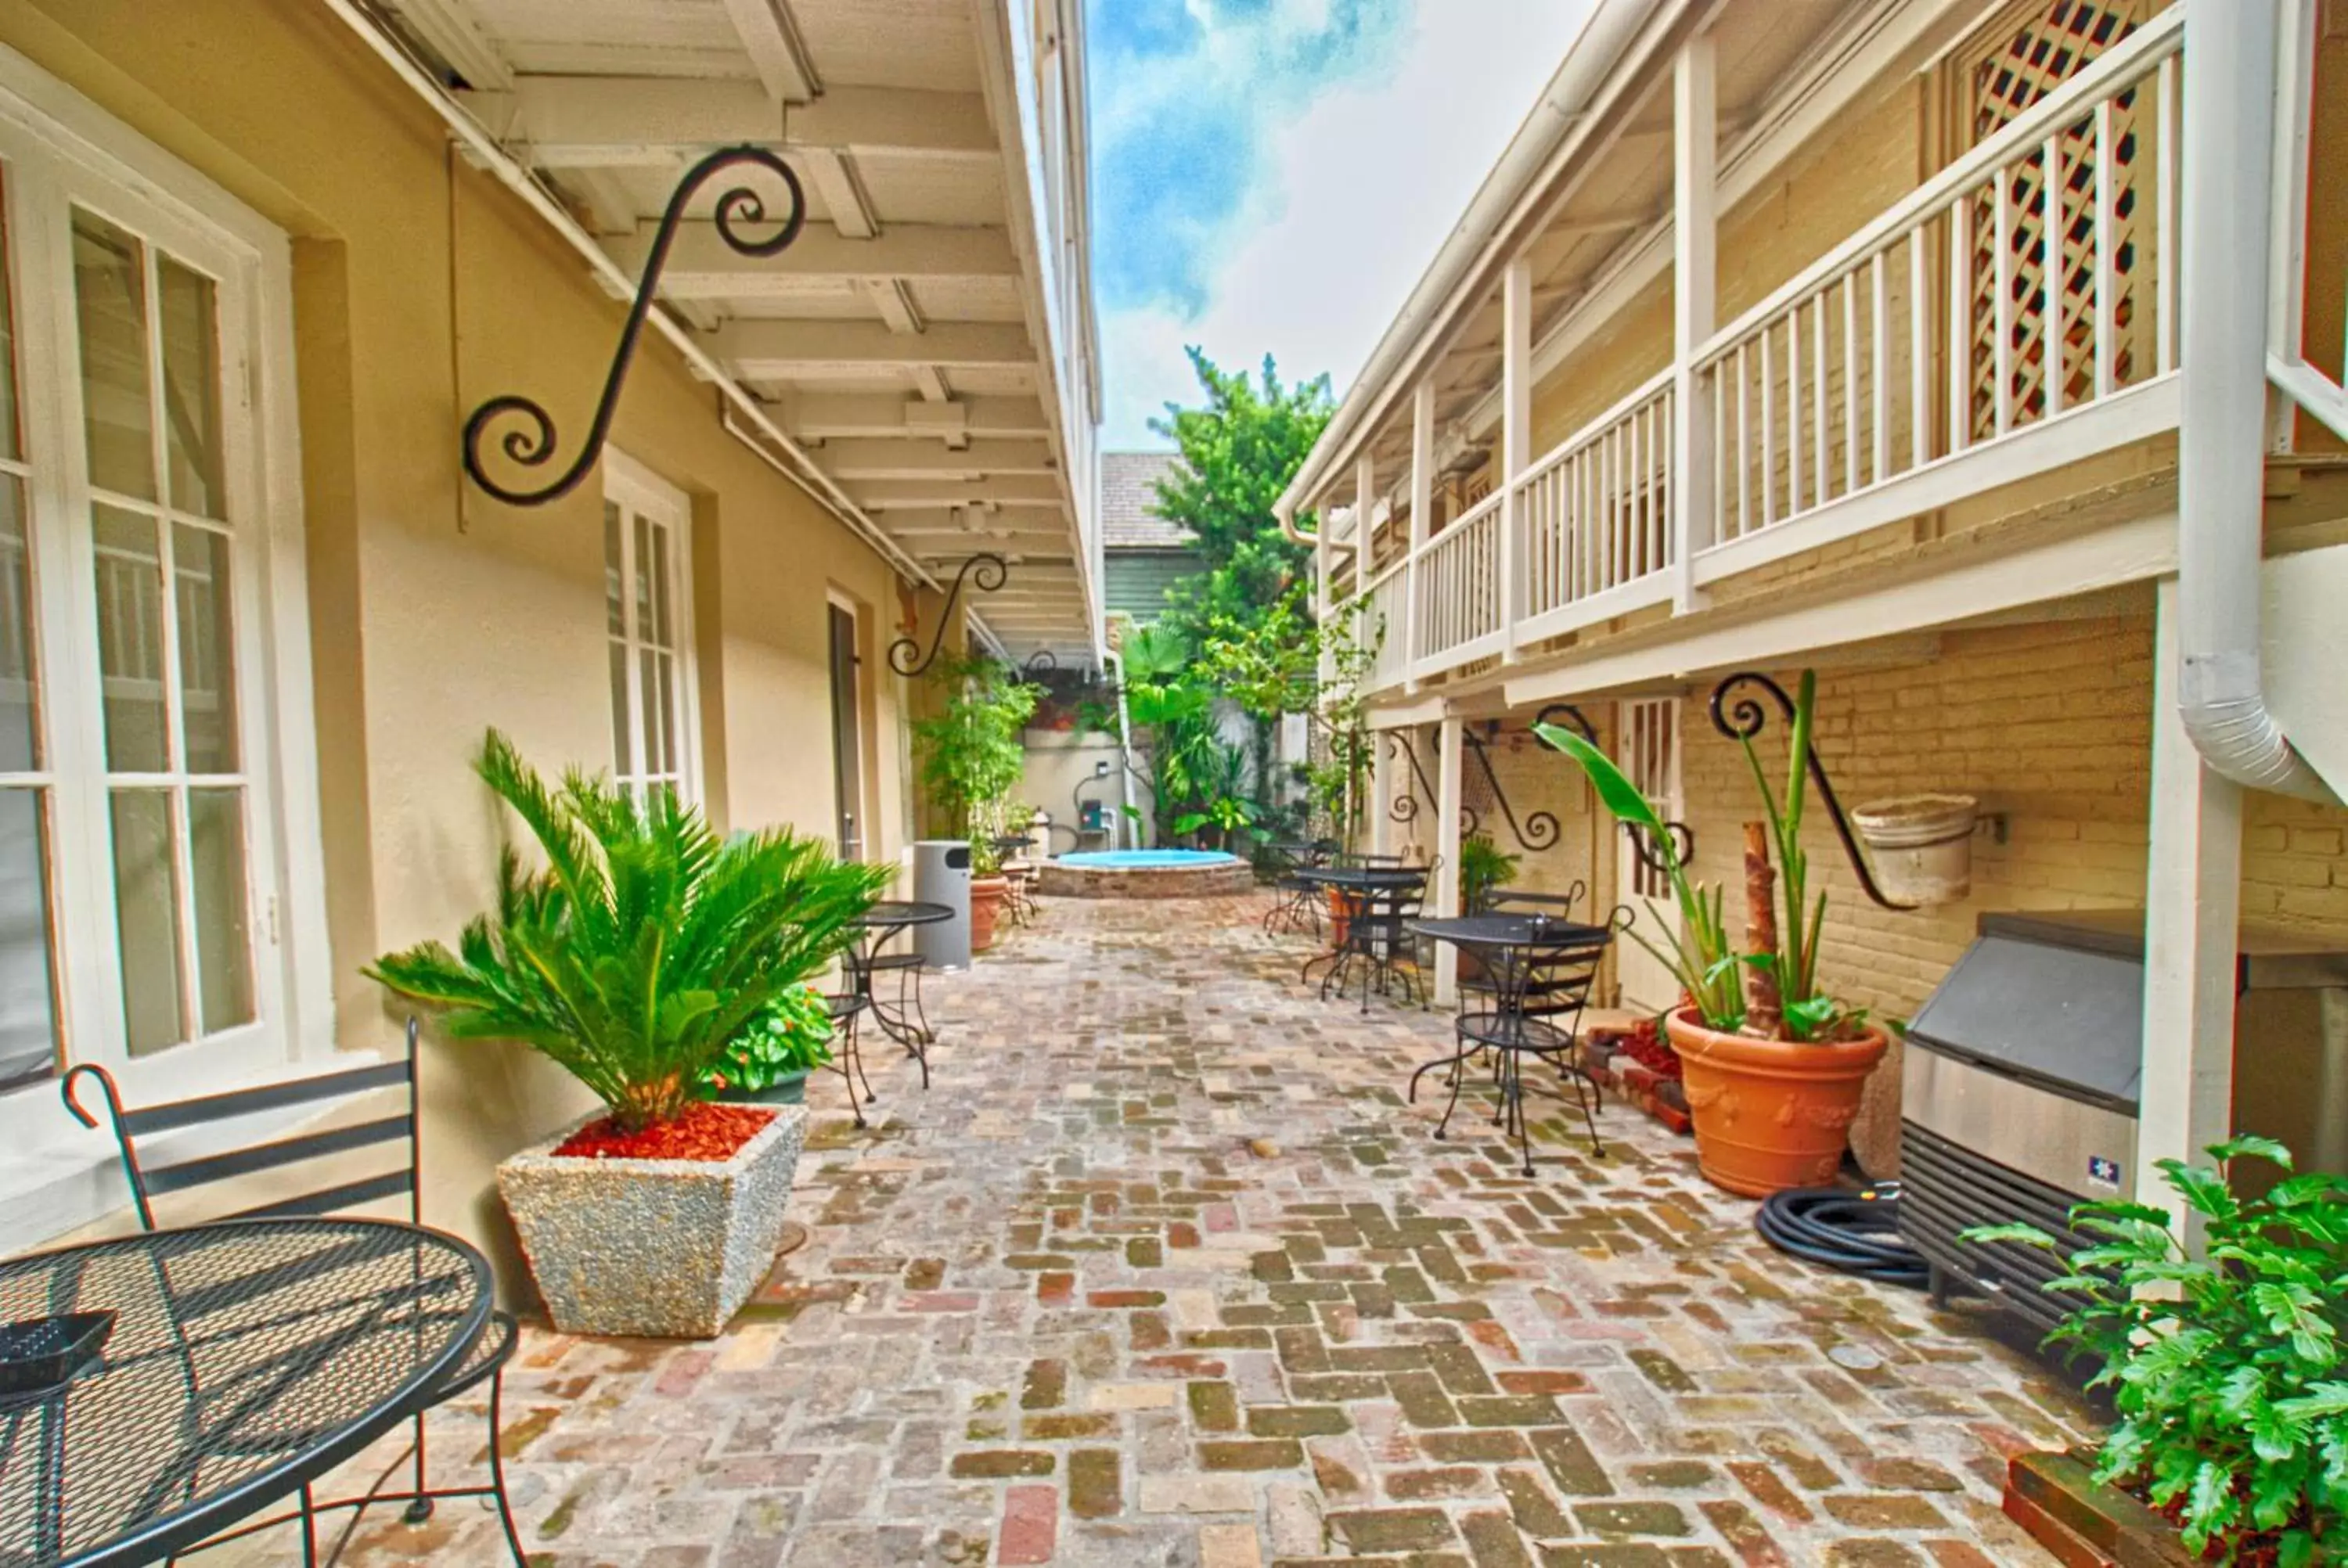 Patio in Inn on Ursulines, a French Quarter Guest Houses Property